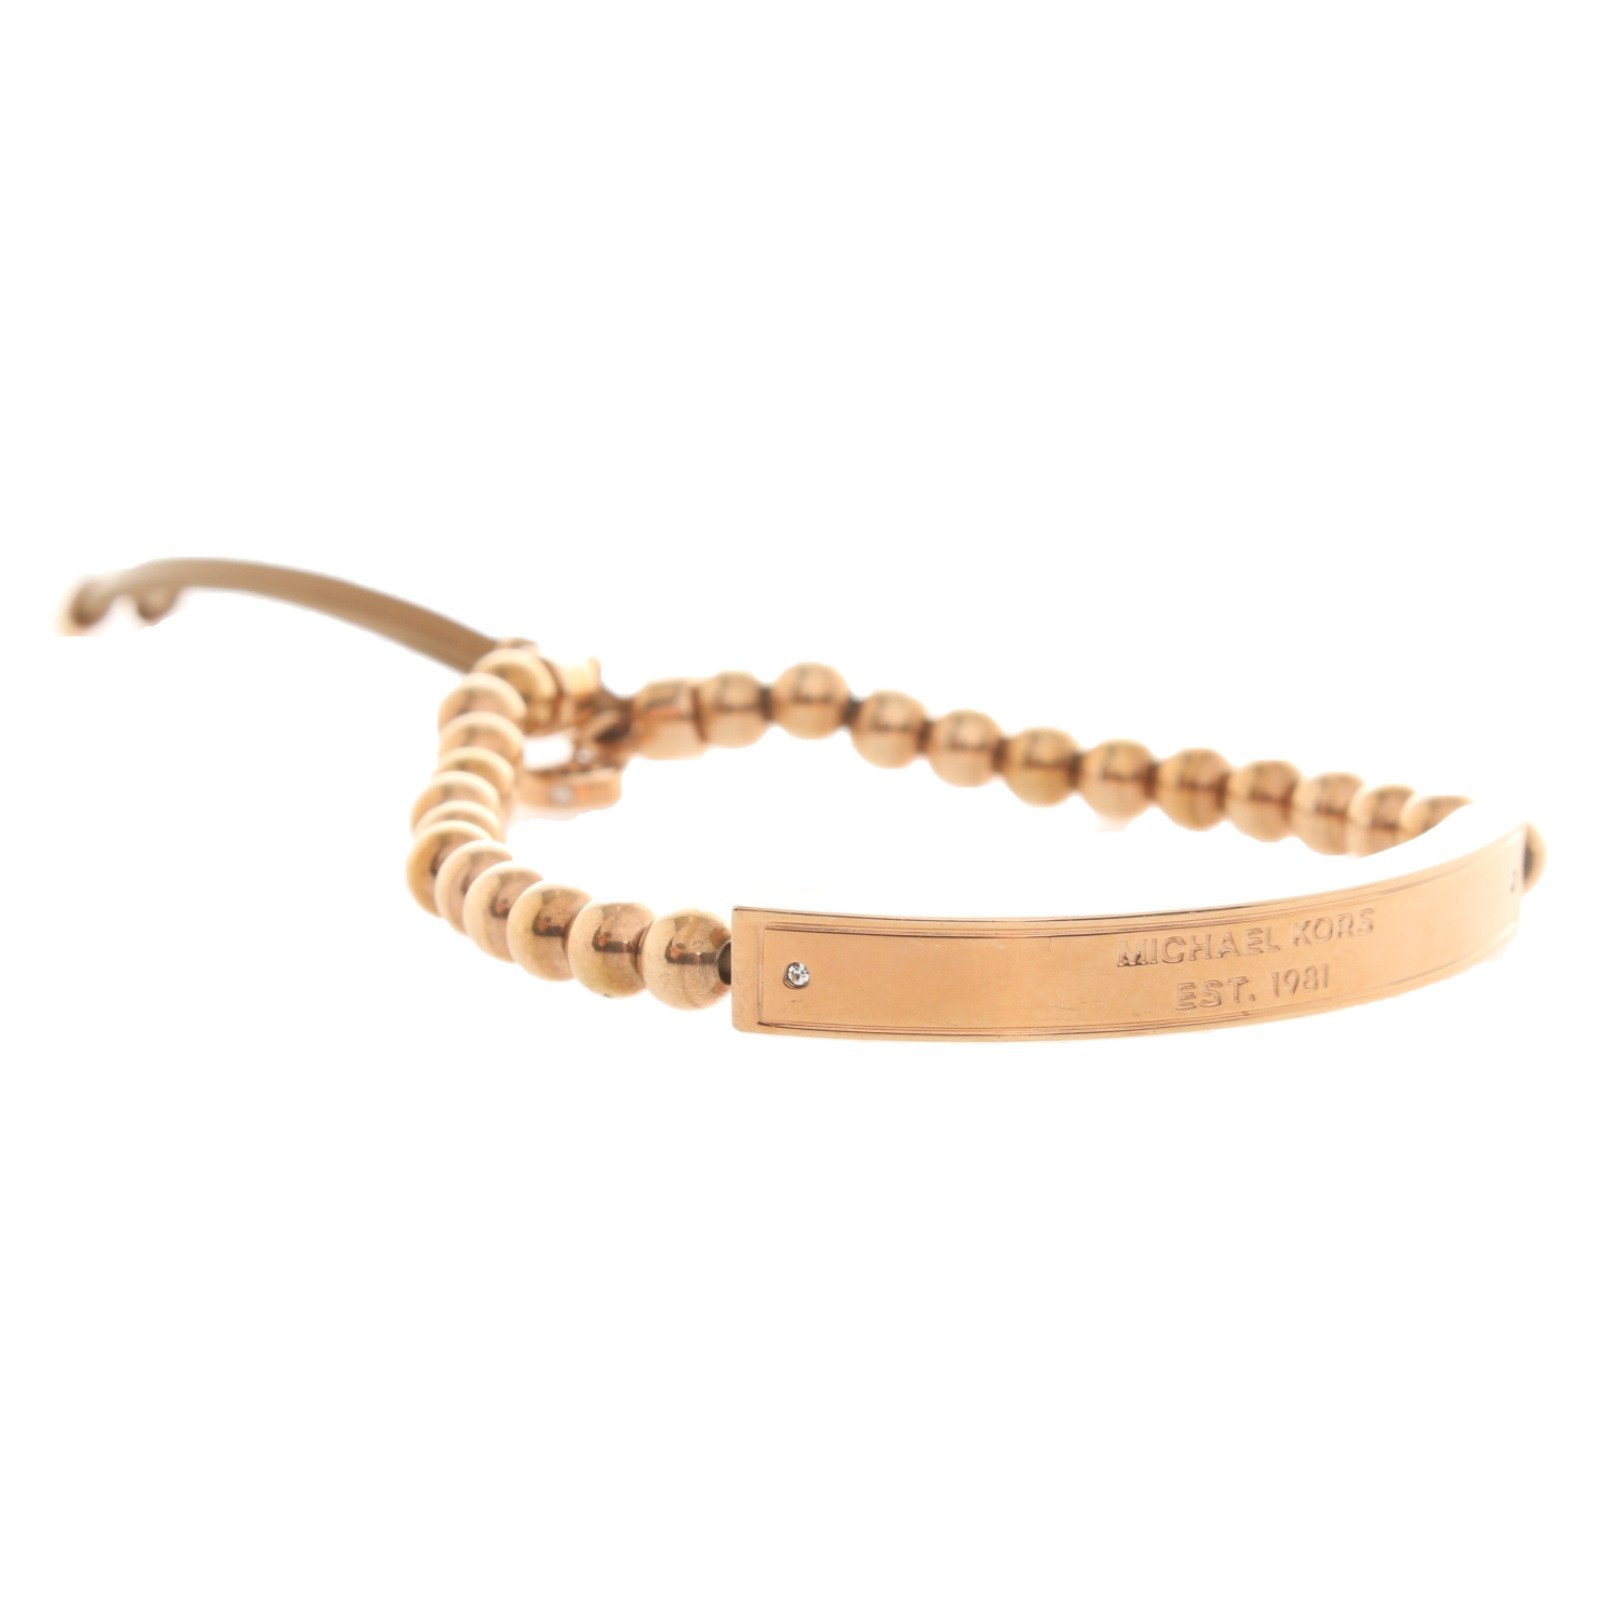 Michael Kors Bracelet/Wristband in Gold - Second Hand Michael Kors Bracelet/Wristband  in Gold buy used for 69€ (6944491)